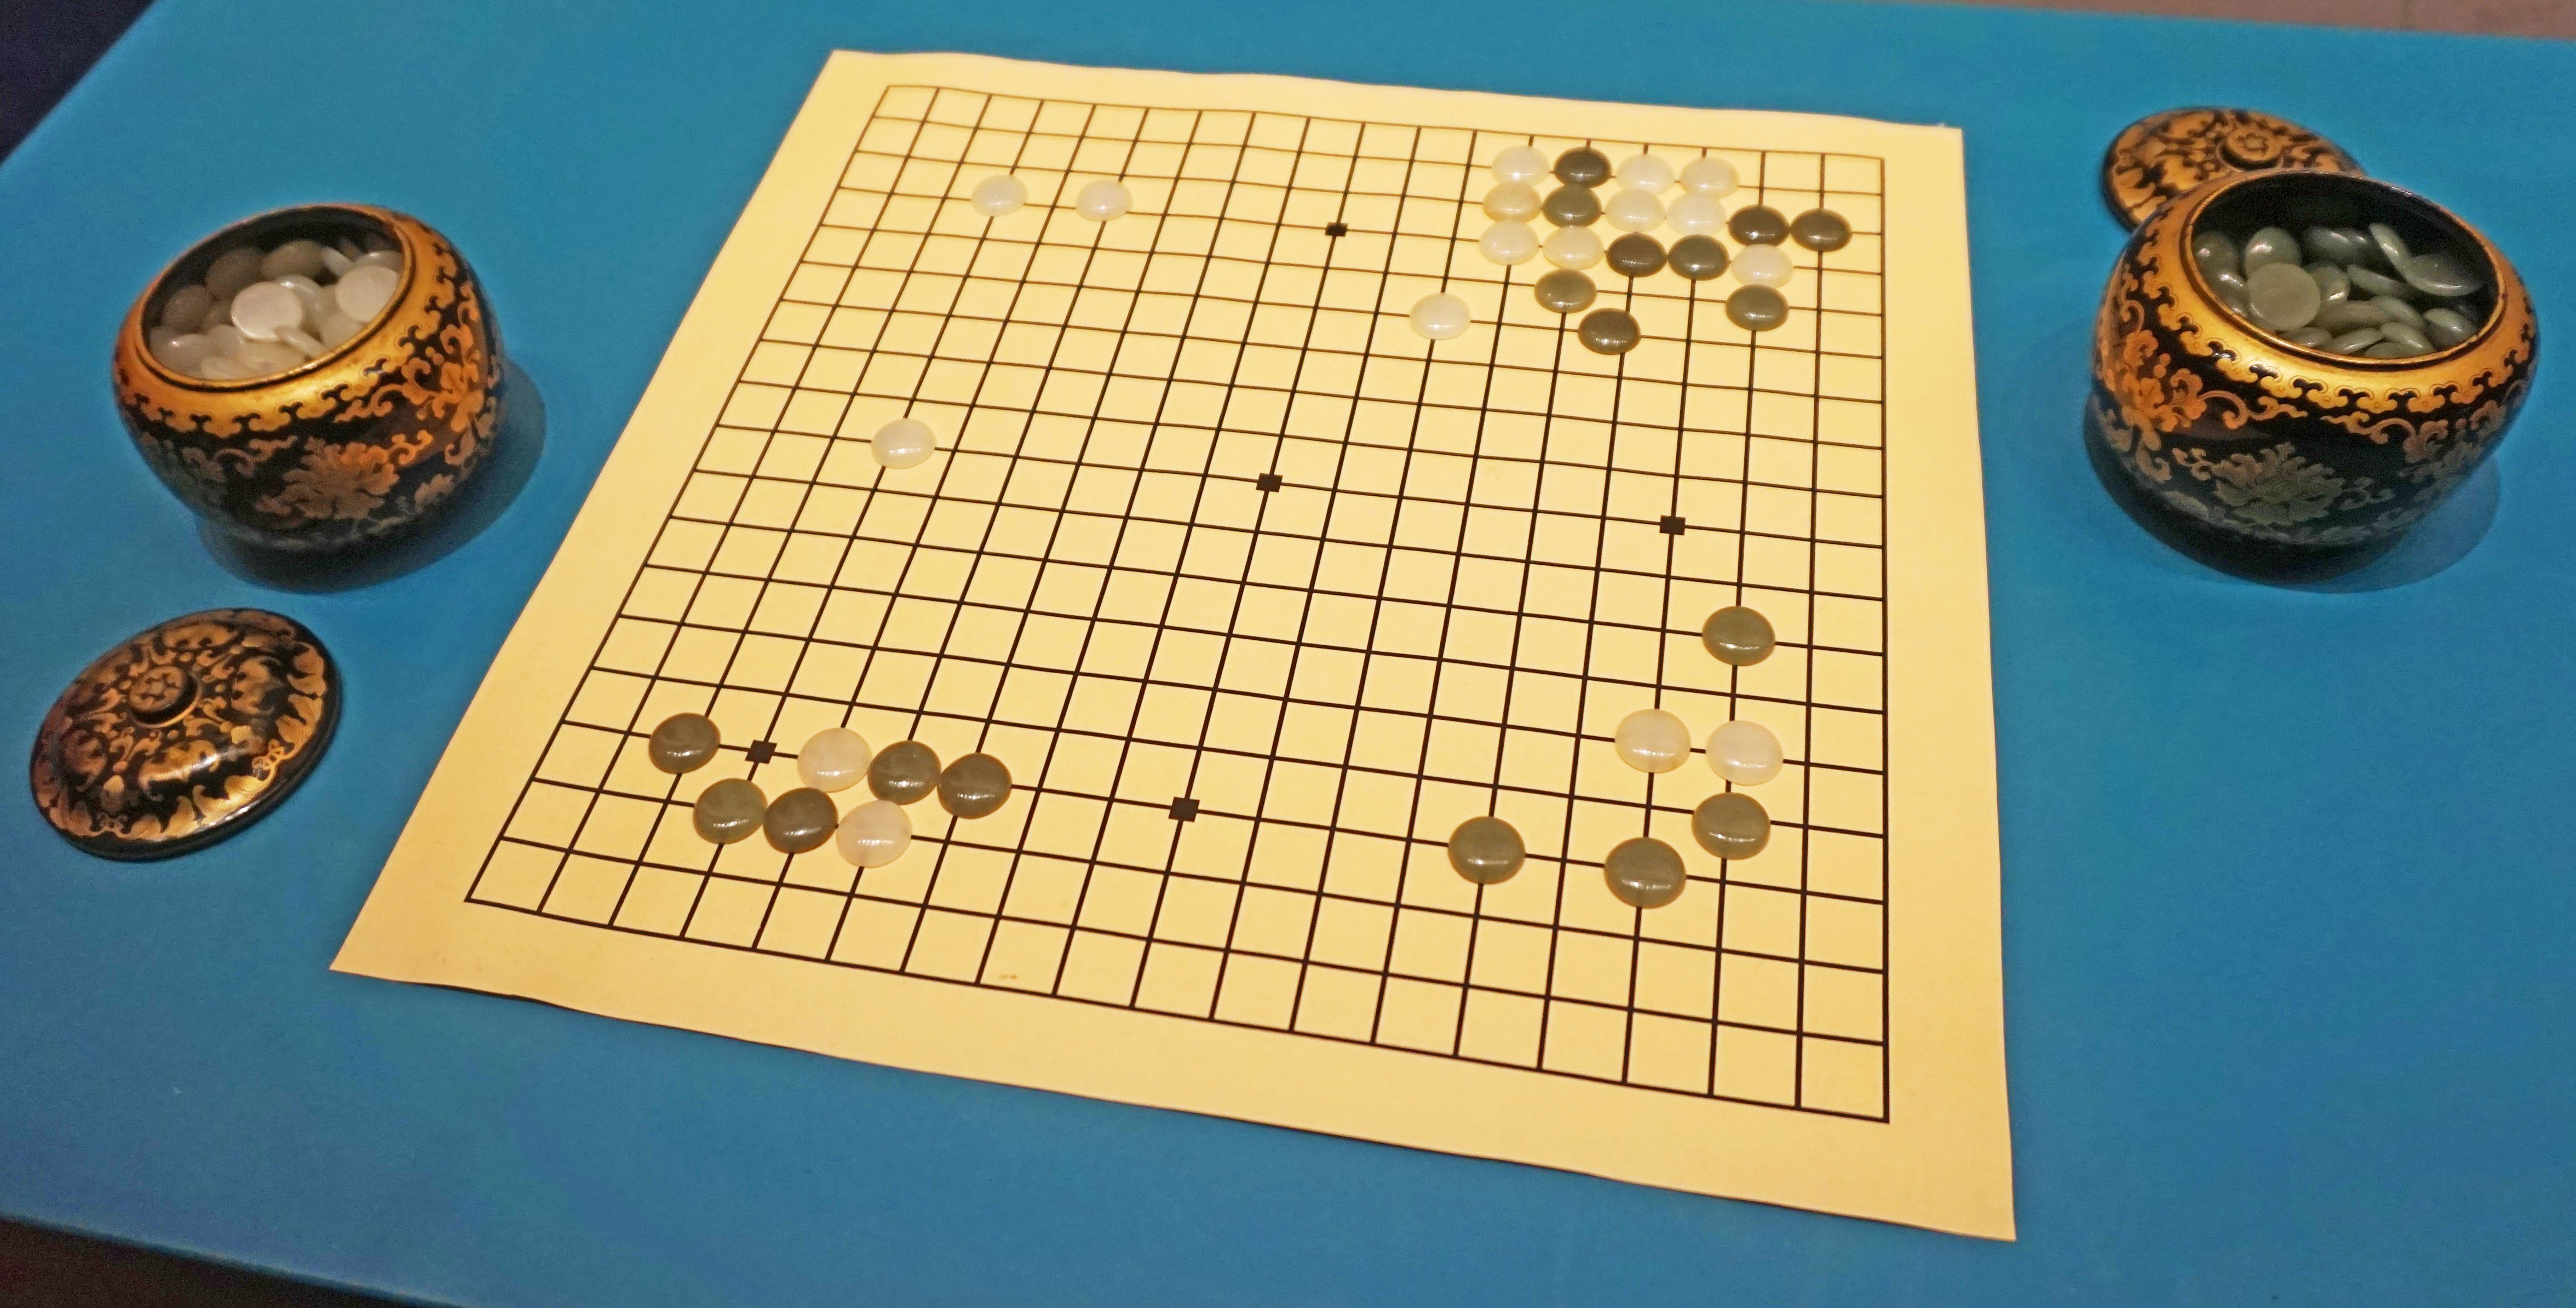 How an Old Shonen Jump Manga Revived an Ancient Board Game